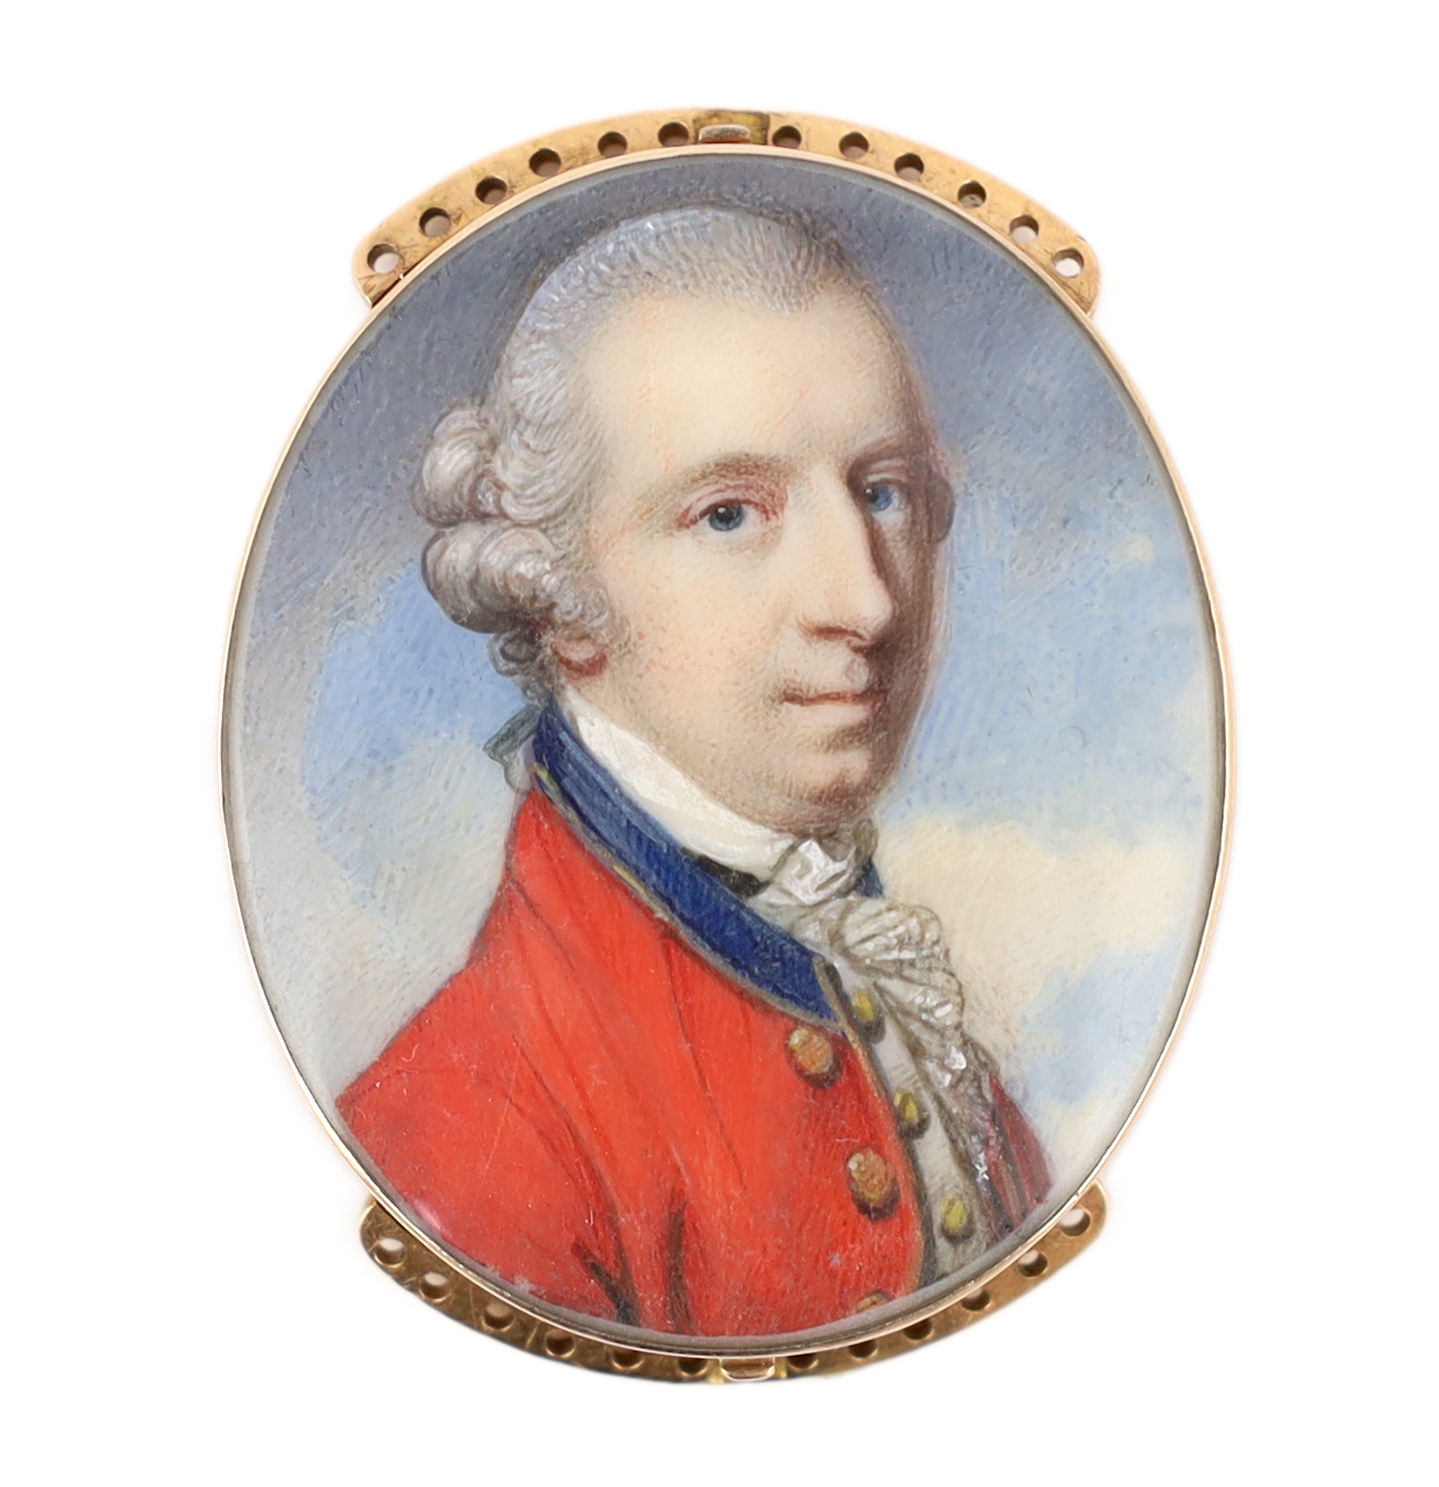 Jeremiah Meyer, R.A. (Anglo-German, 1735-1789), Portrait miniature of an army officer, watercolour on ivory, 3.9 x 3.2cm. CITES Submission reference PU4PGCCX